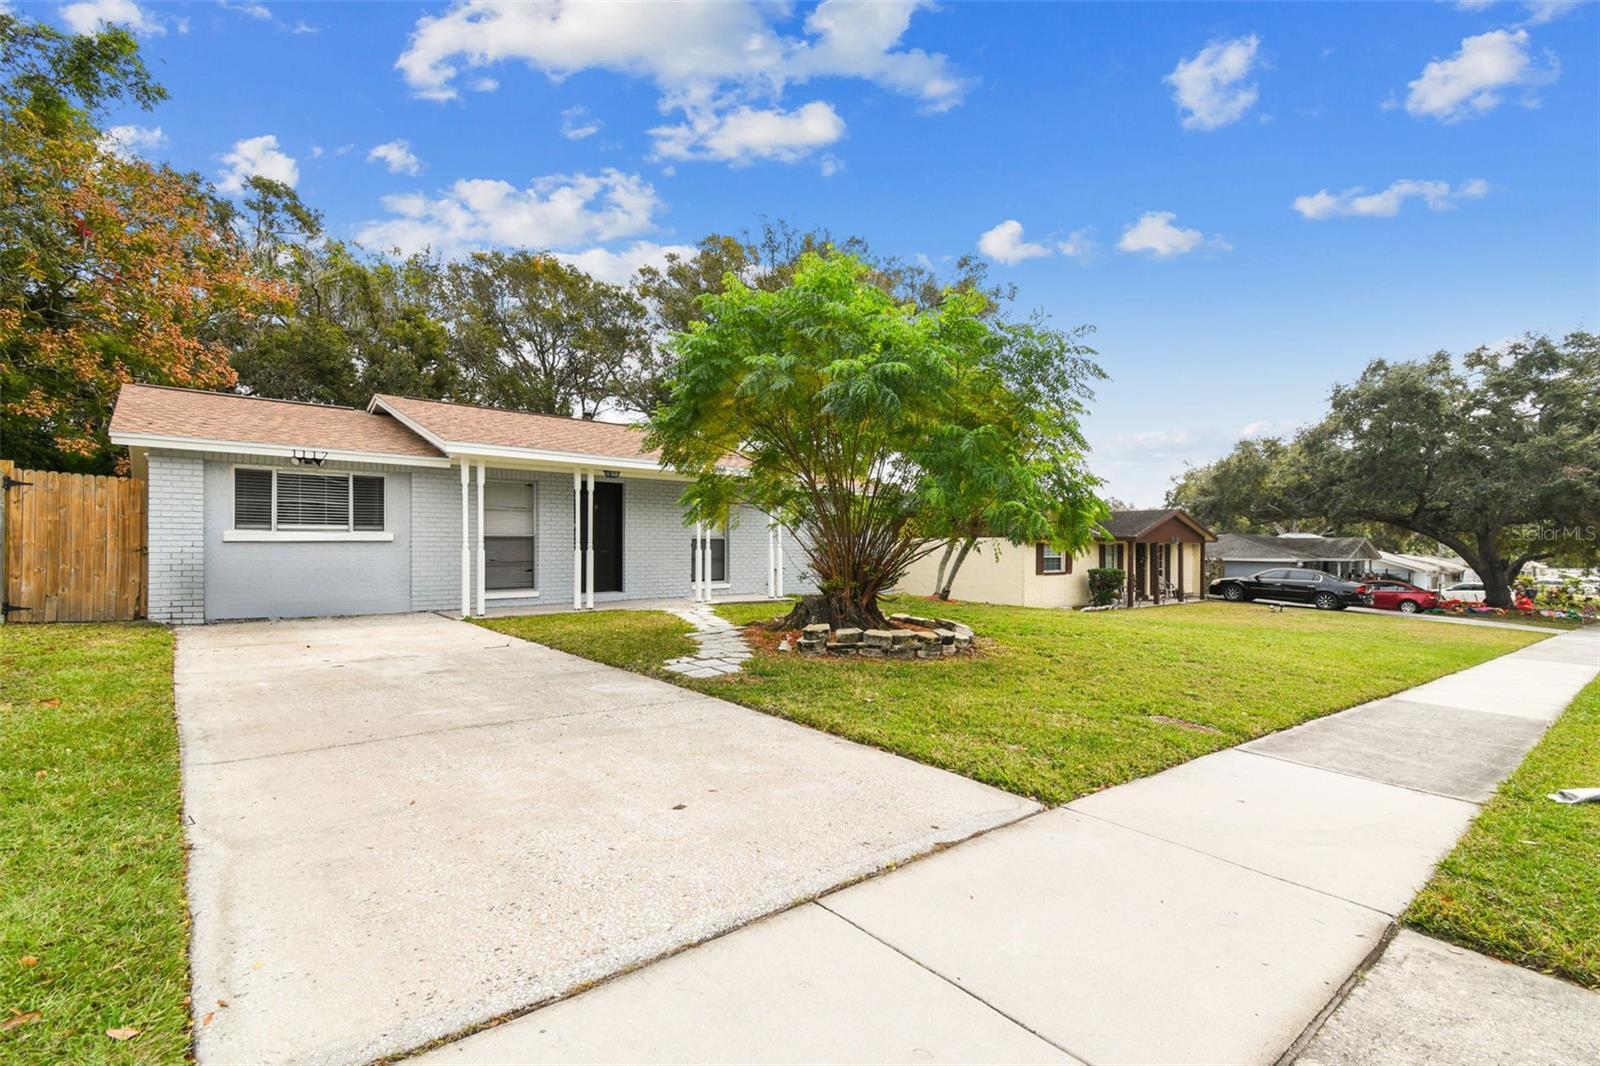 Photo one of 1117 Fairwood Ave Clearwater FL 33759 | MLS U8225151